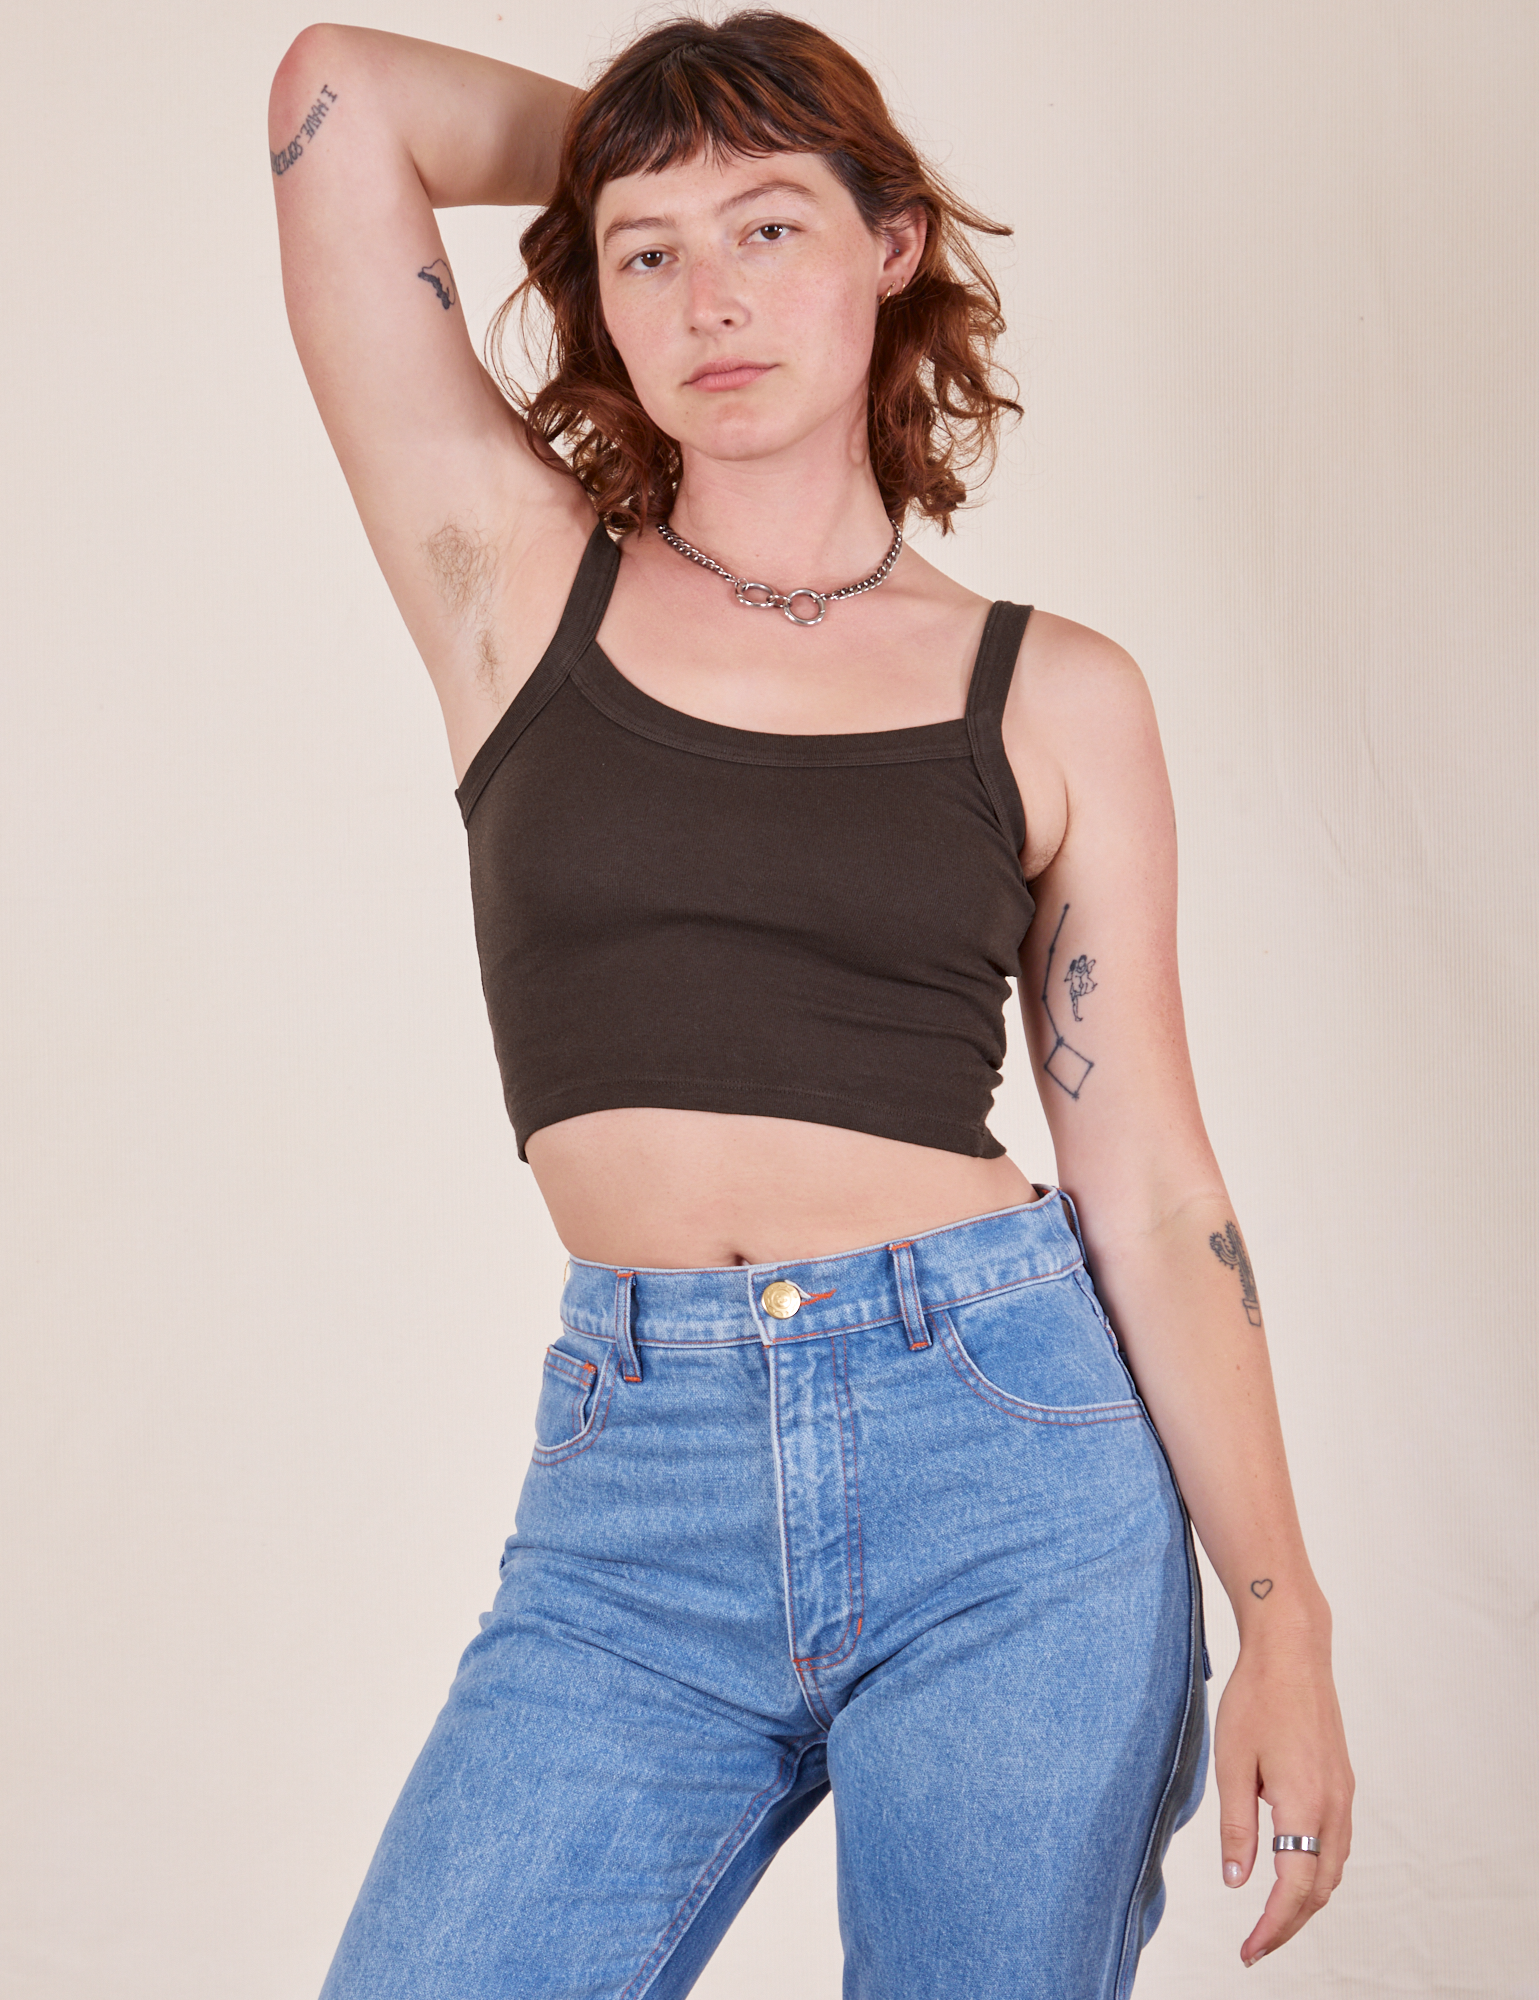 Alex is 5&#39;8&quot; and wearing P Cropped Cami in Espresso Brown paired with light wash Frontier Jeans